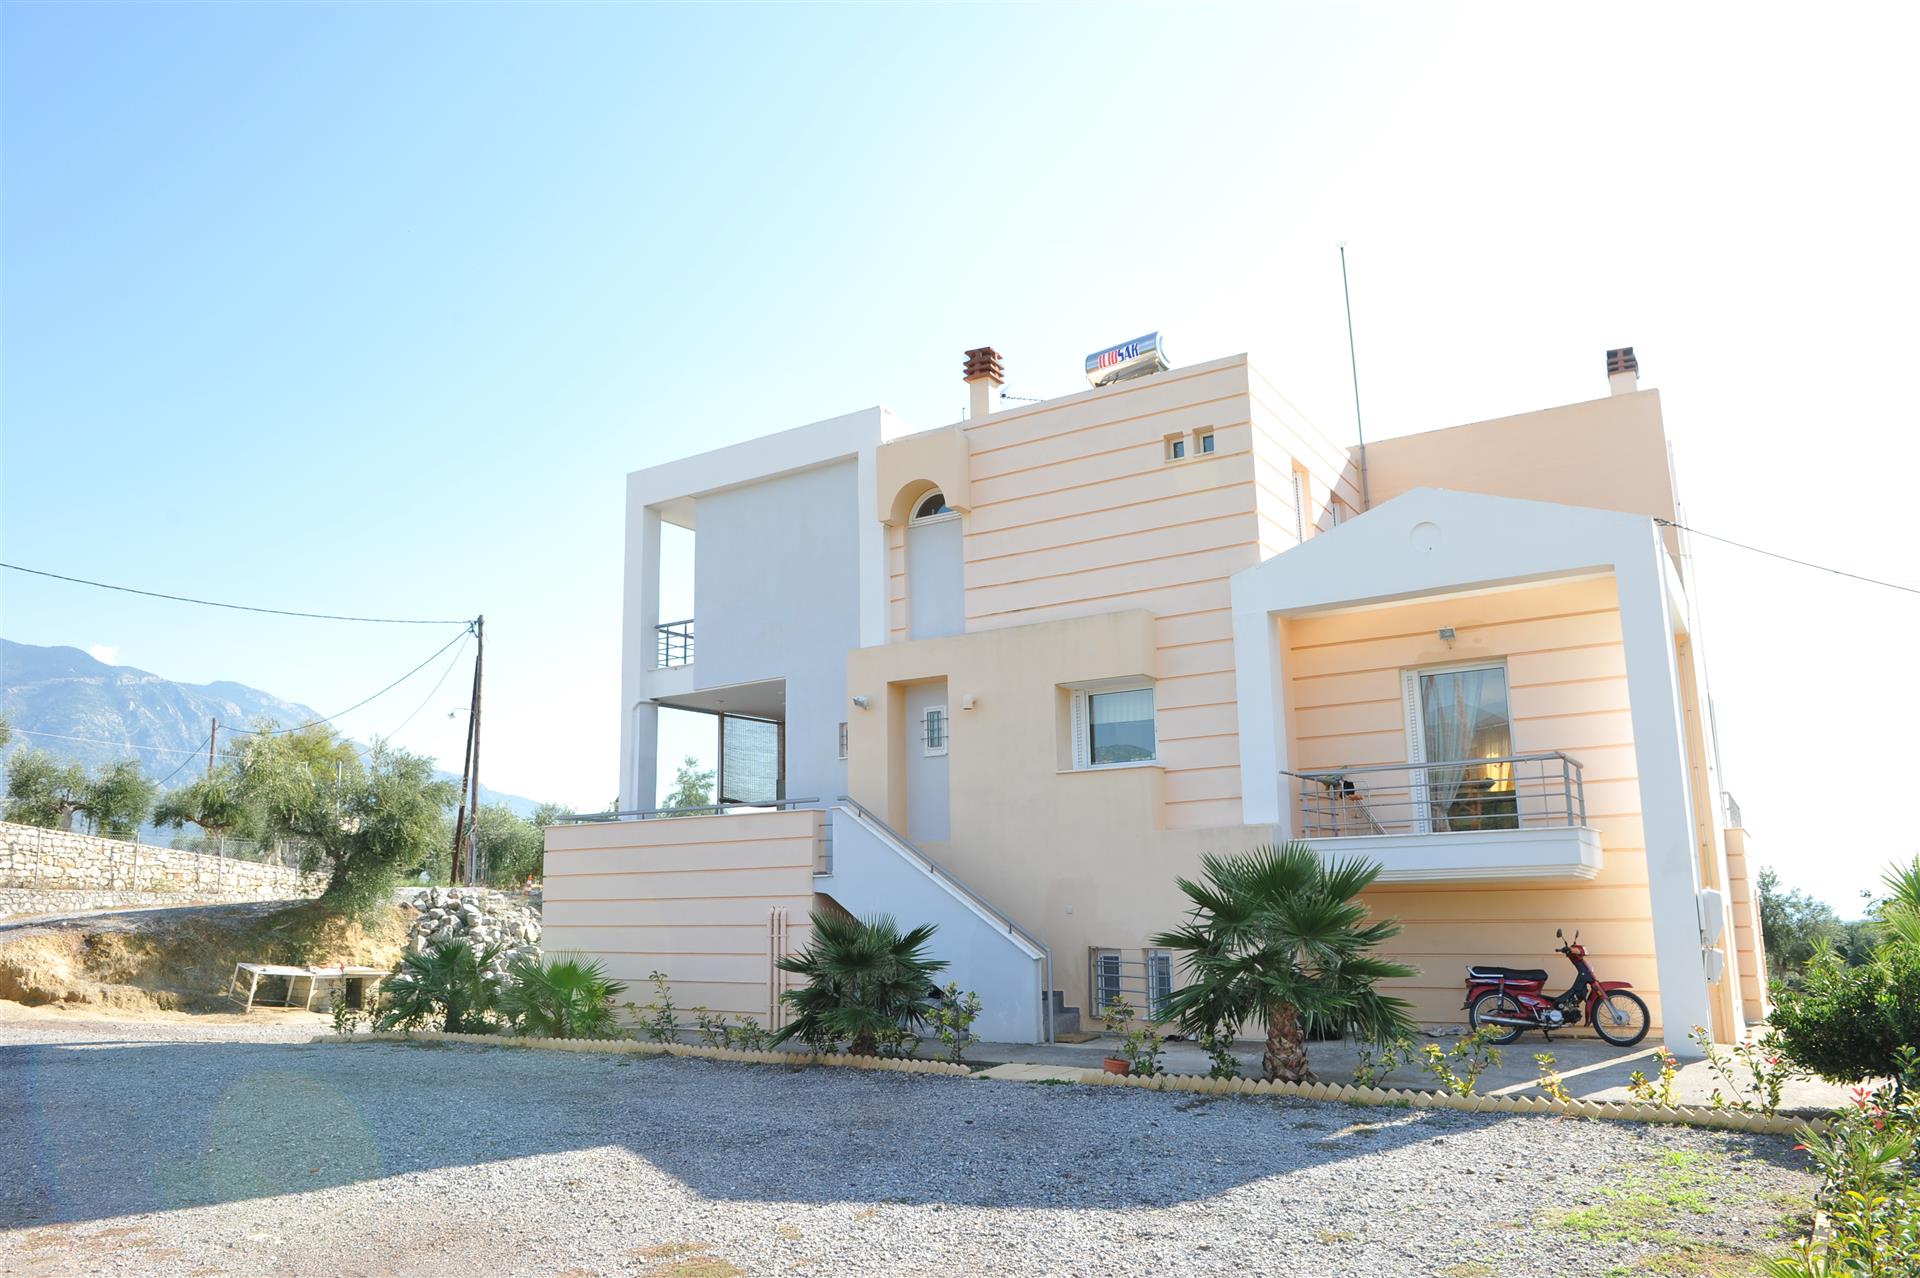 Excellent villa for sale in the Kallithea area of Kalamata